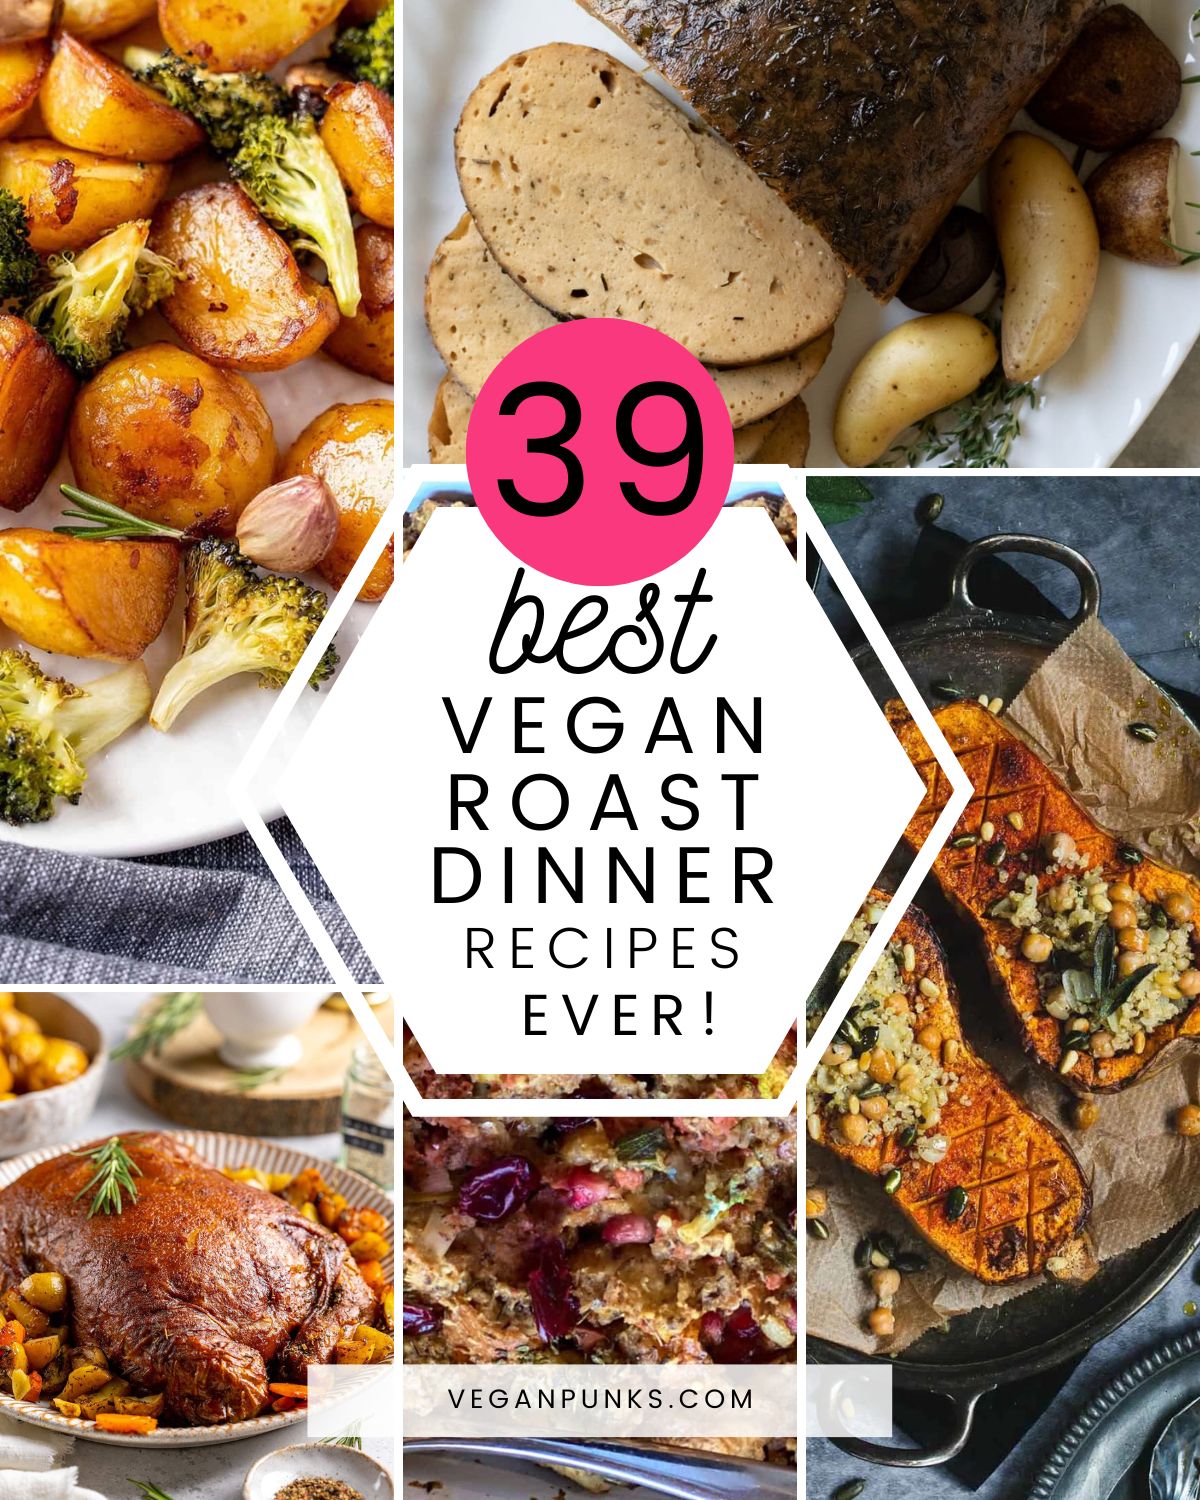 Collage of vegan roast dinner recipes with a title in the middle.